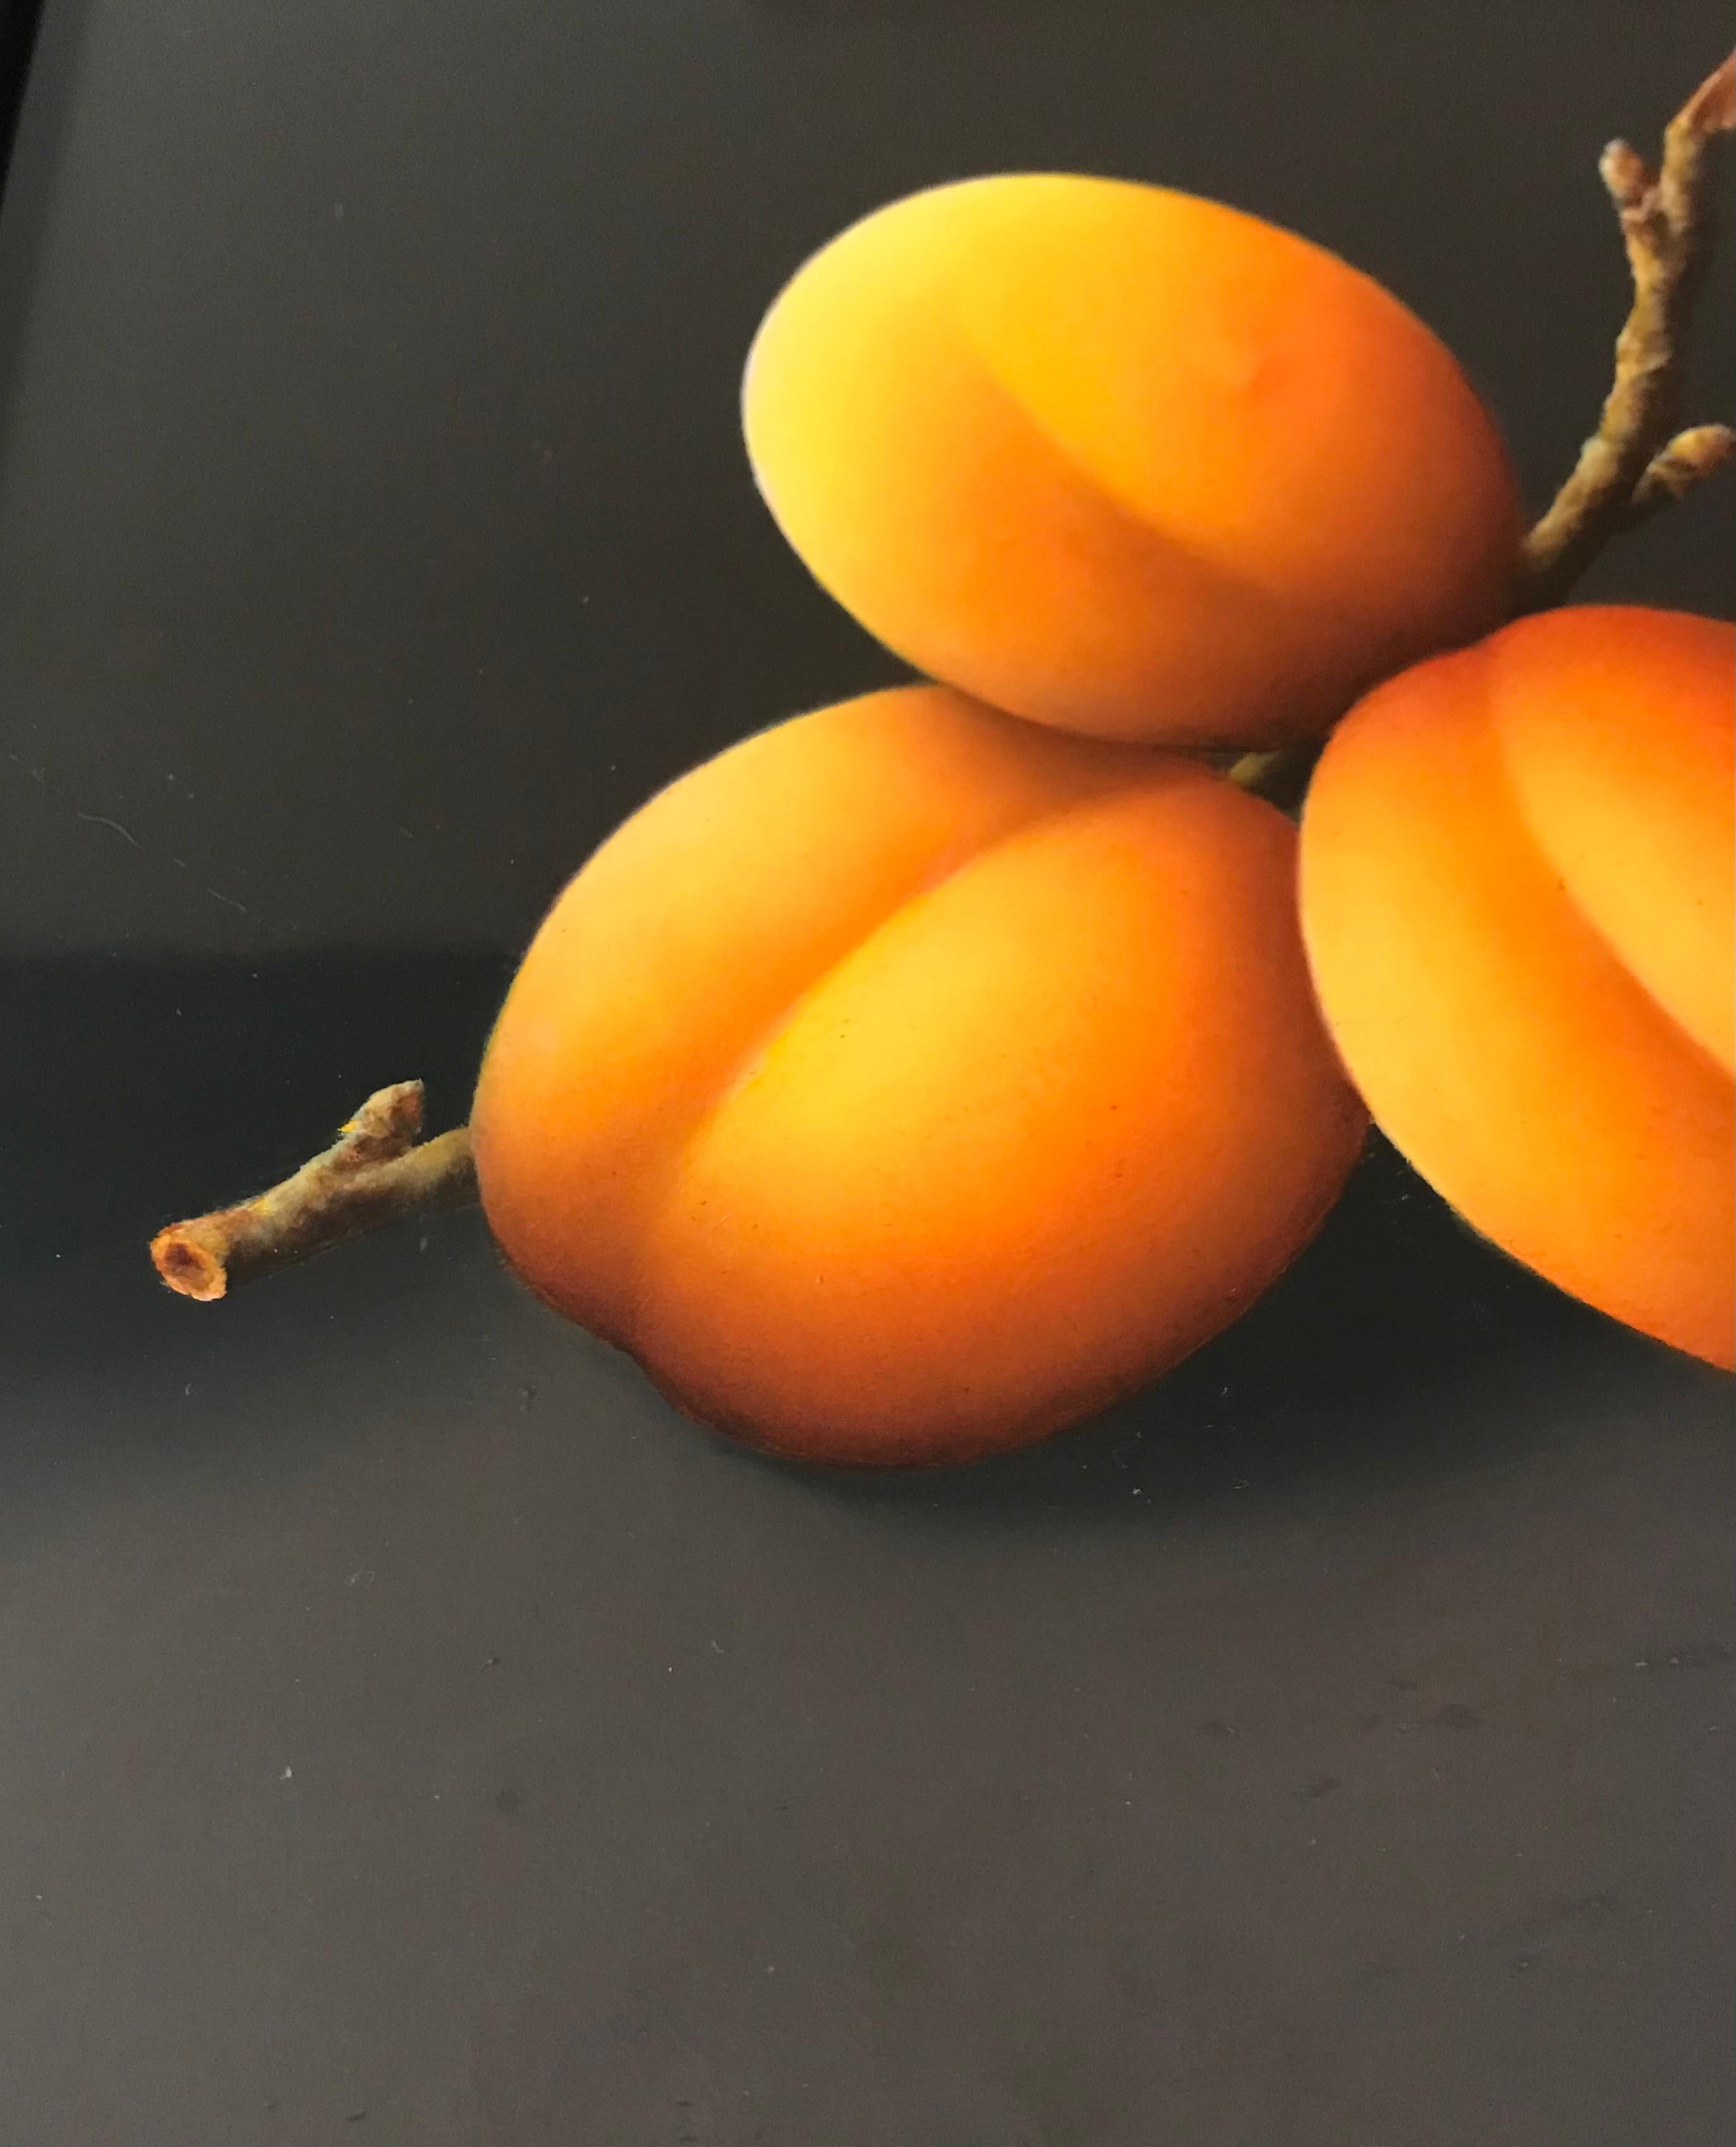 “Apricots” Contemporary Fine Realist Still-Life Painting of Apricots, Fruit 1